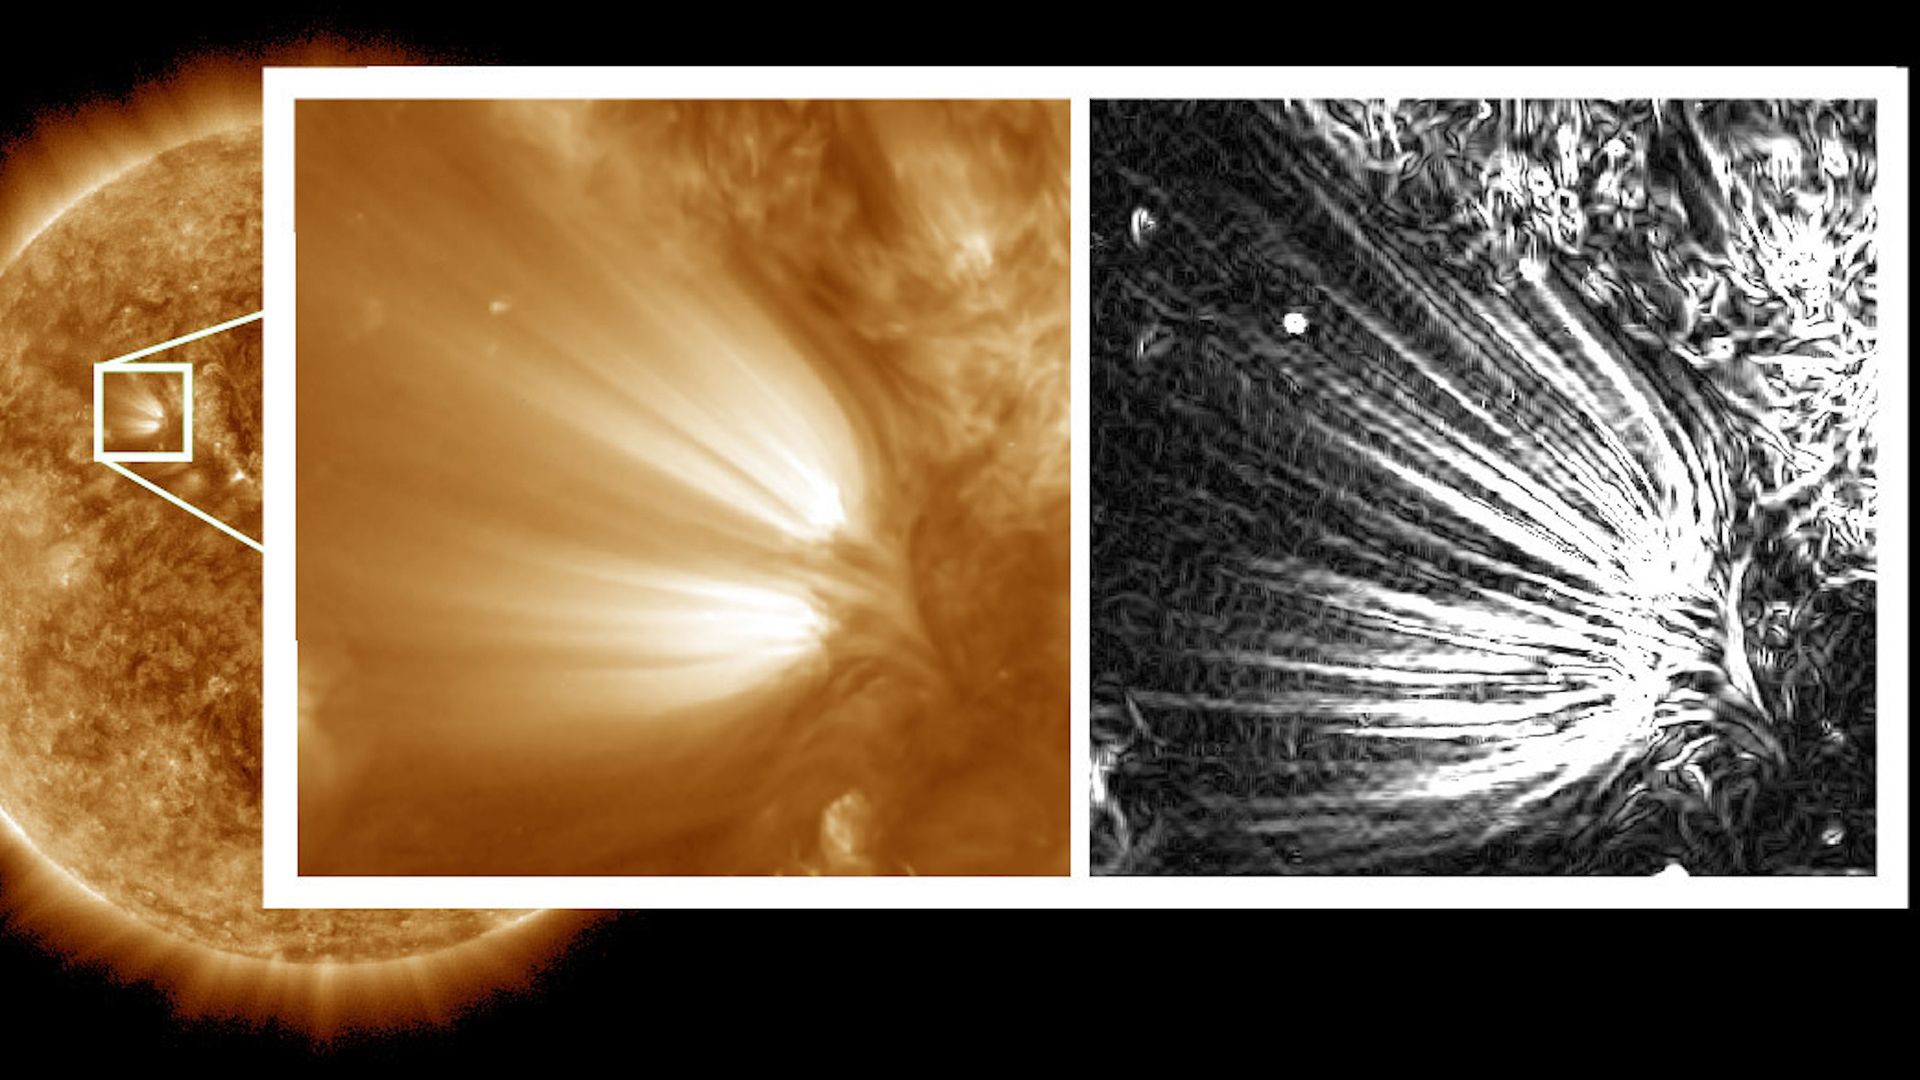 Small details shown on the Sun in an inset, one in gold, one in black and white. The details look like streams